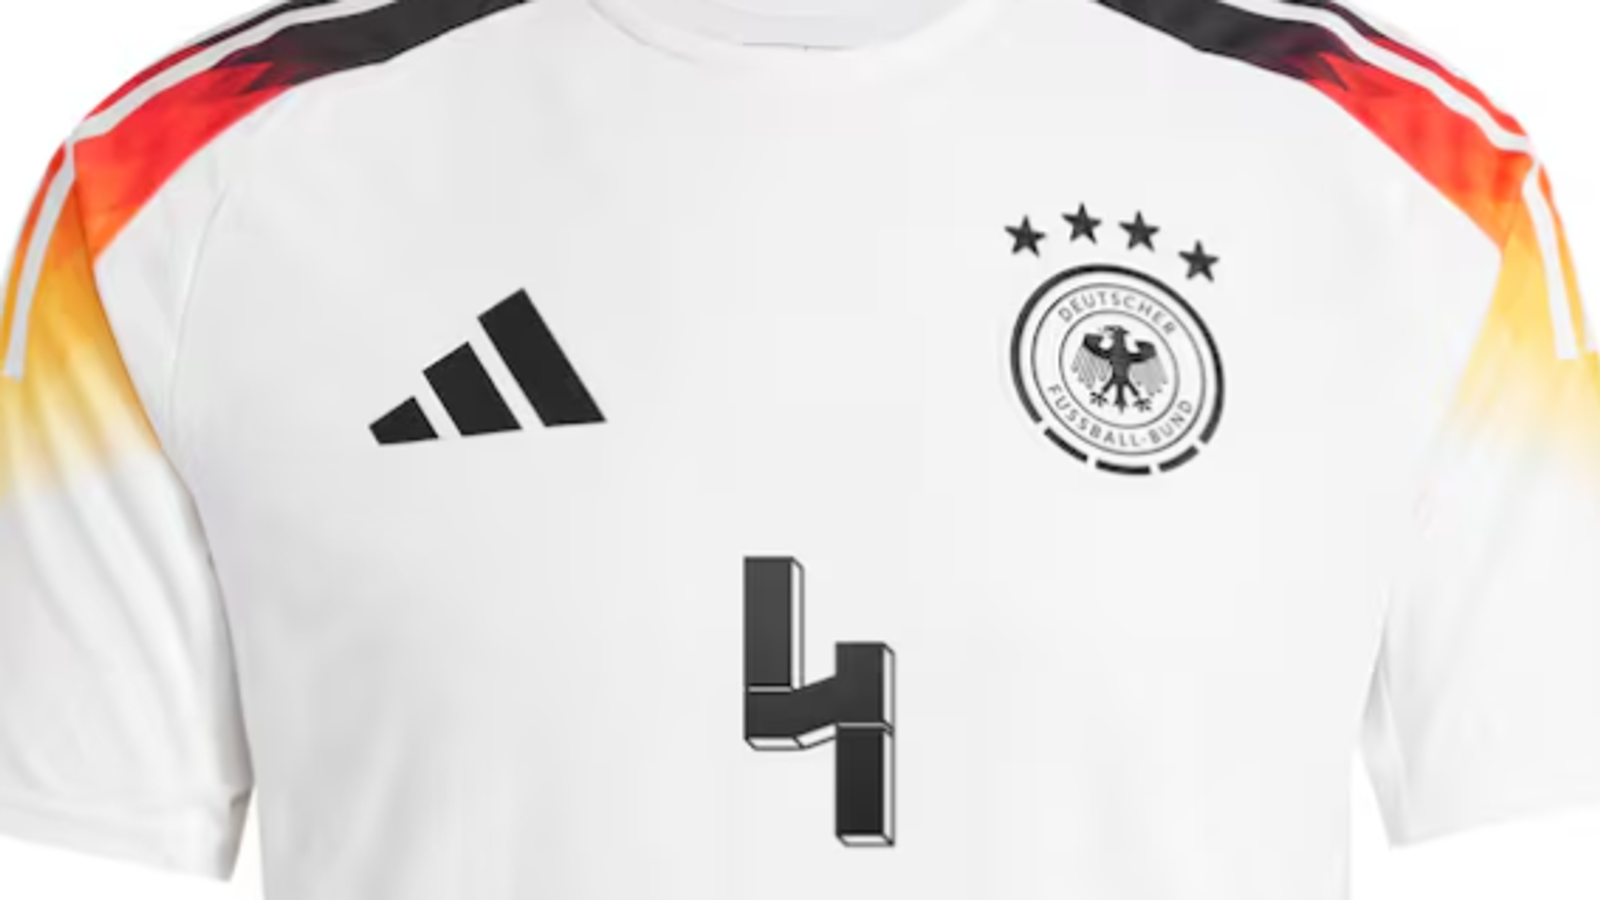 Germany Scraps Number 44 Jersey Design Over Nazi Symbol Resemblance